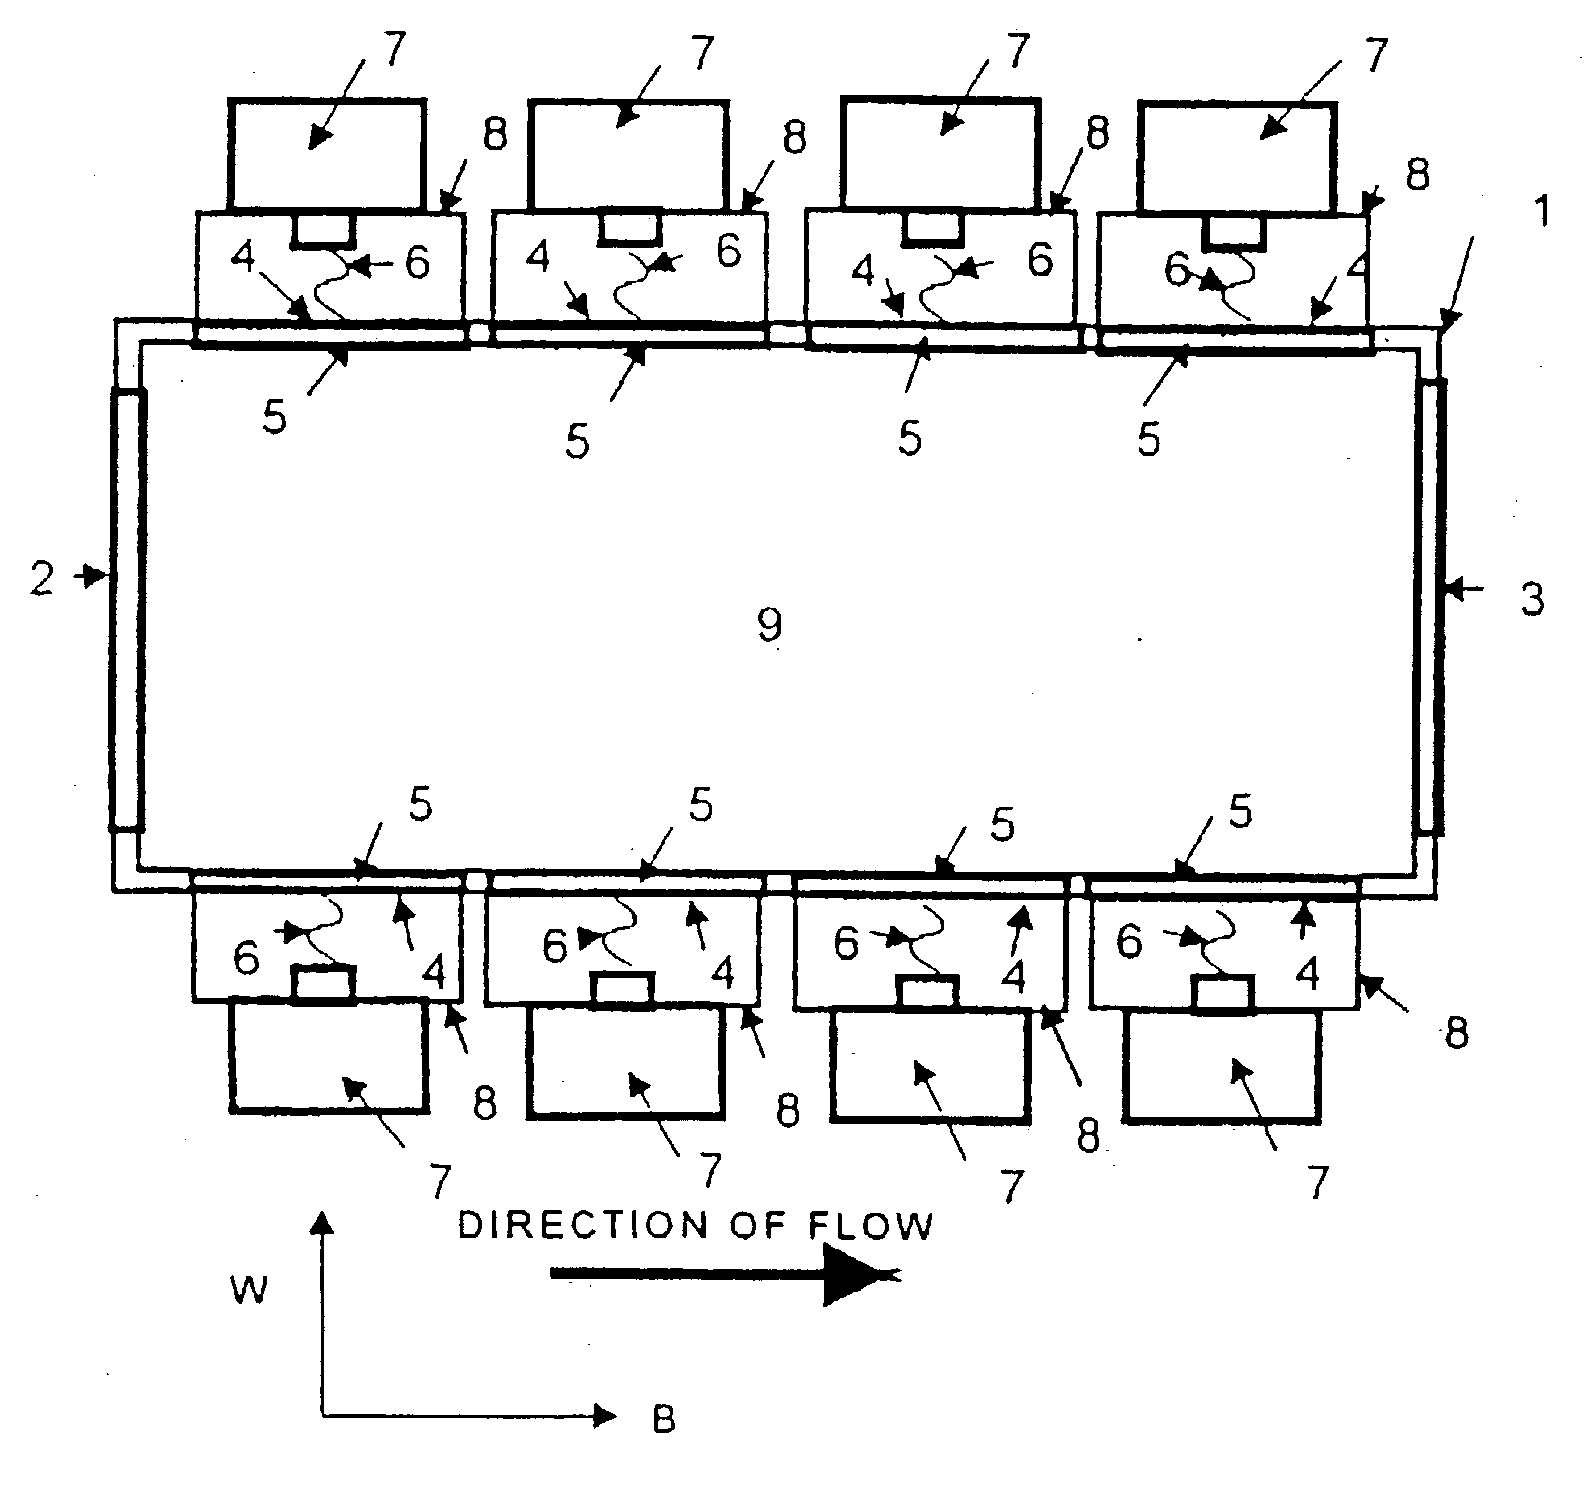 Field concentrators for artificial dielectric systems and devices